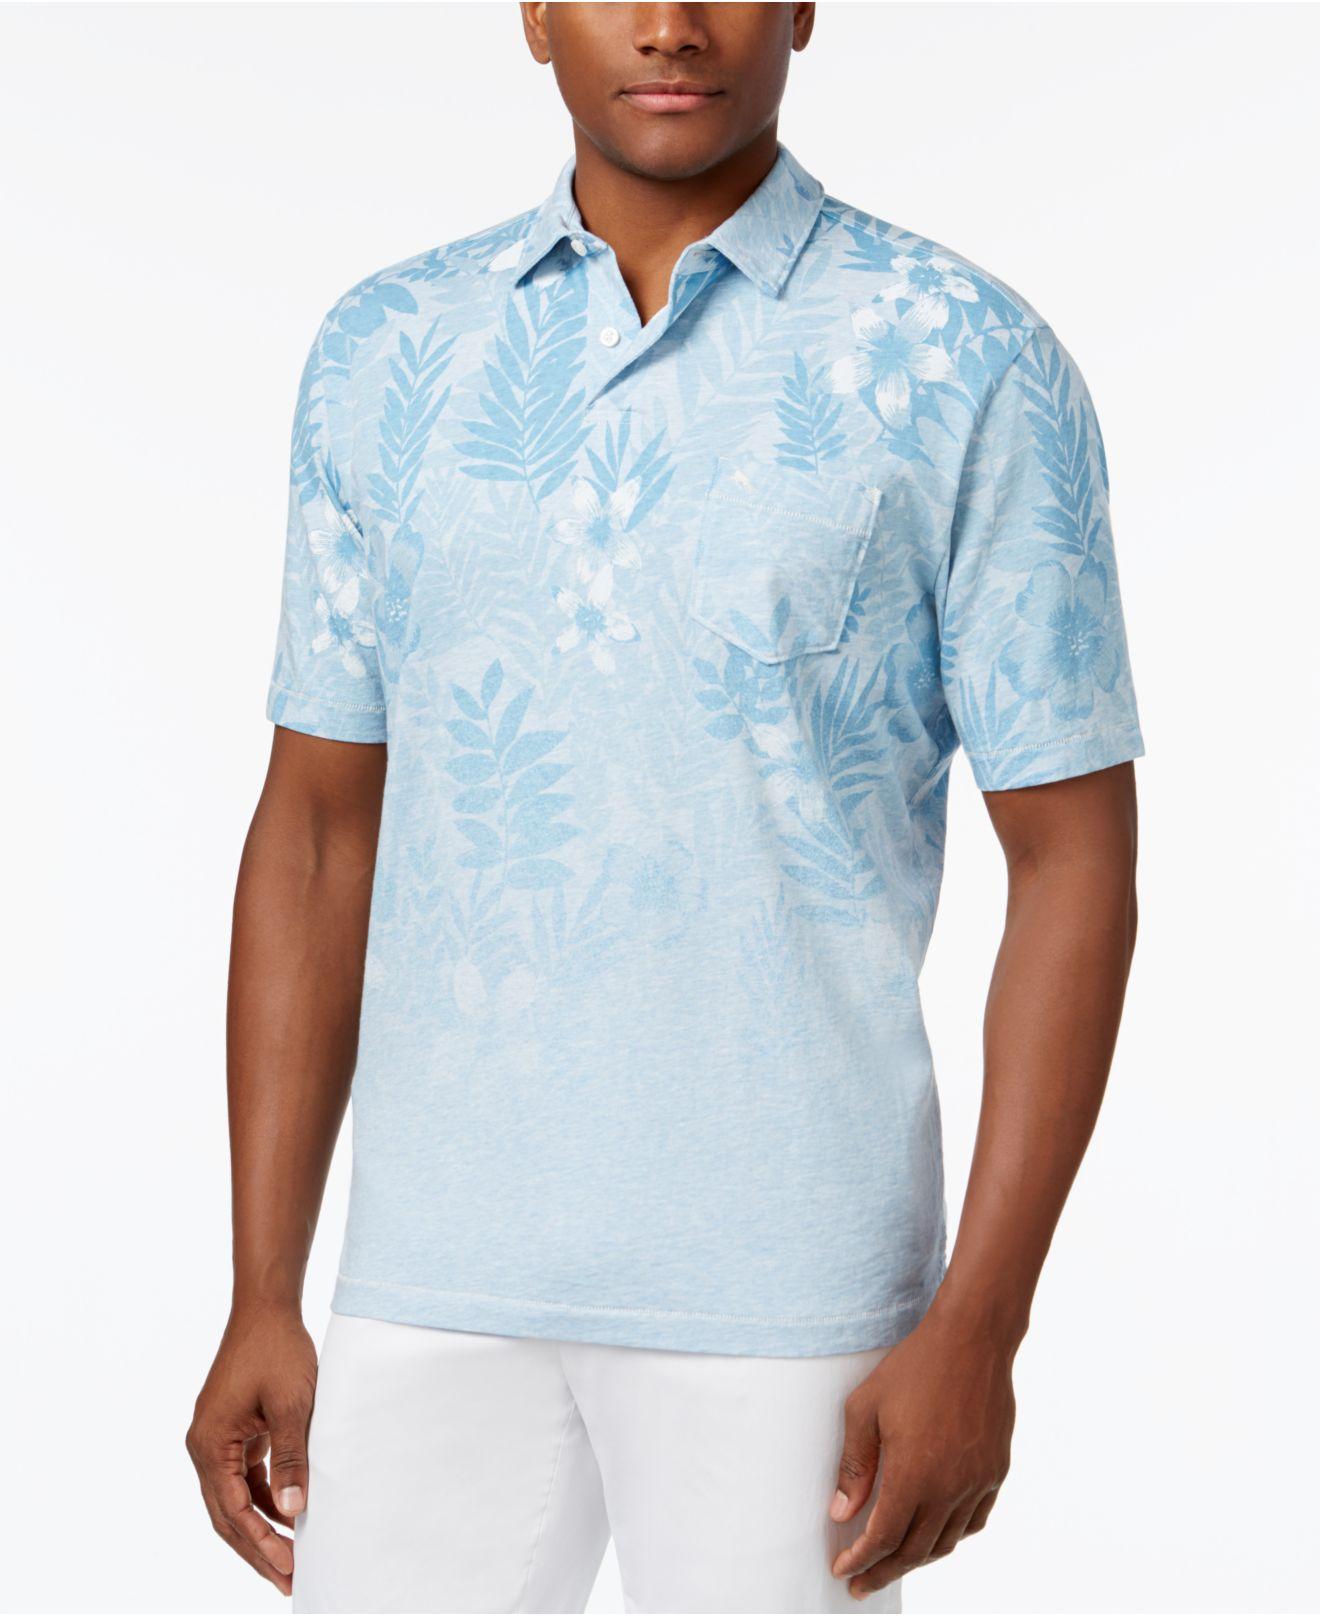 Lyst - Tommy Bahama Men's Floral Fade Polo in Blue for Men